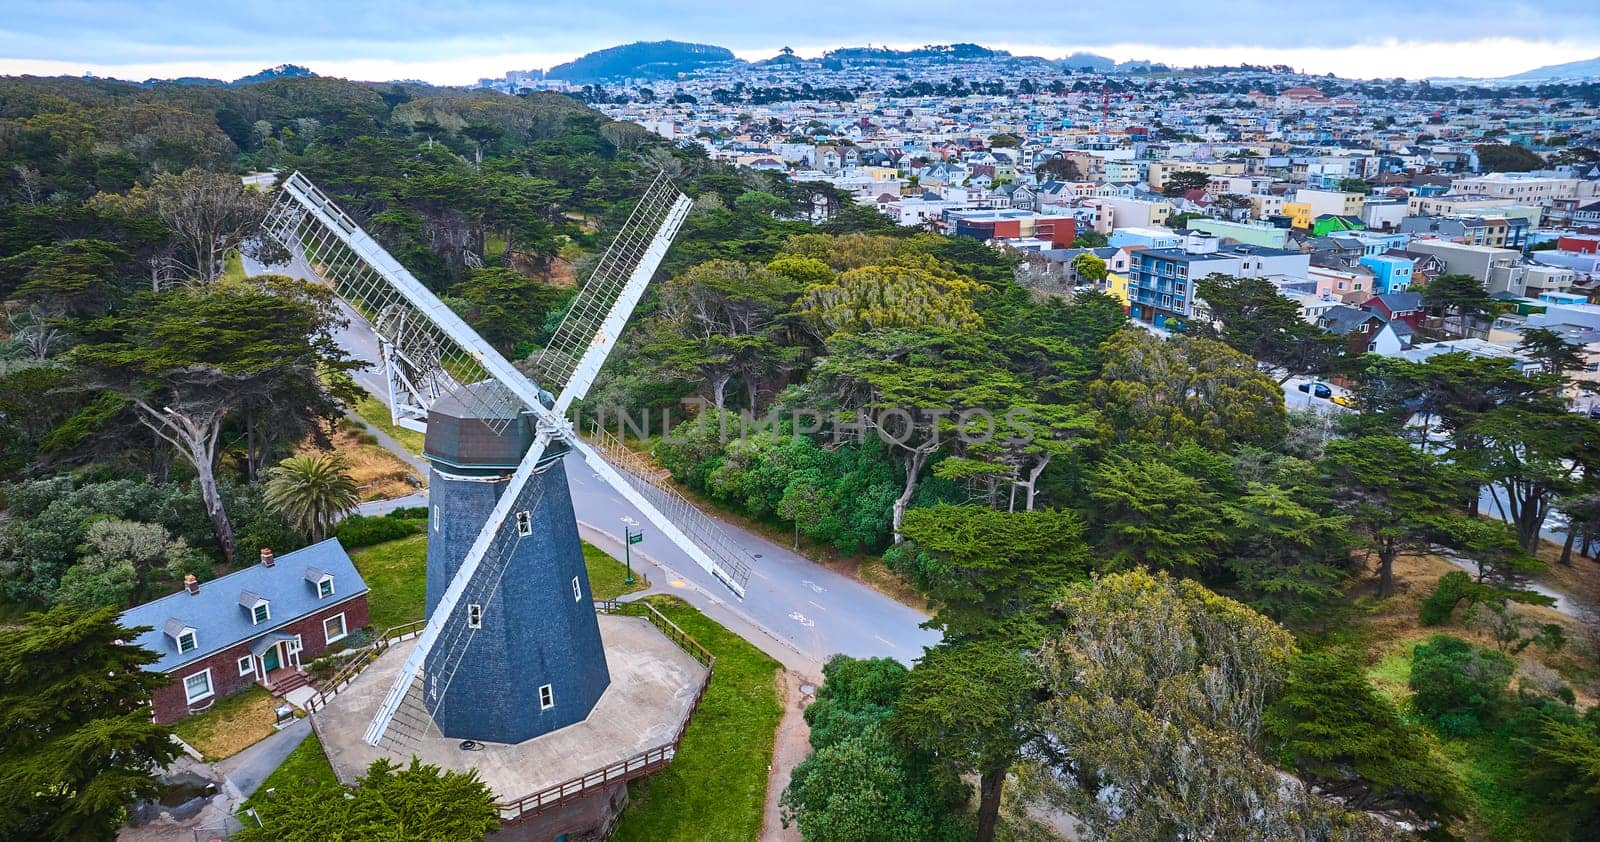 Image of Aerial slate blue murphy windmill with white blades with home and trees beside large city